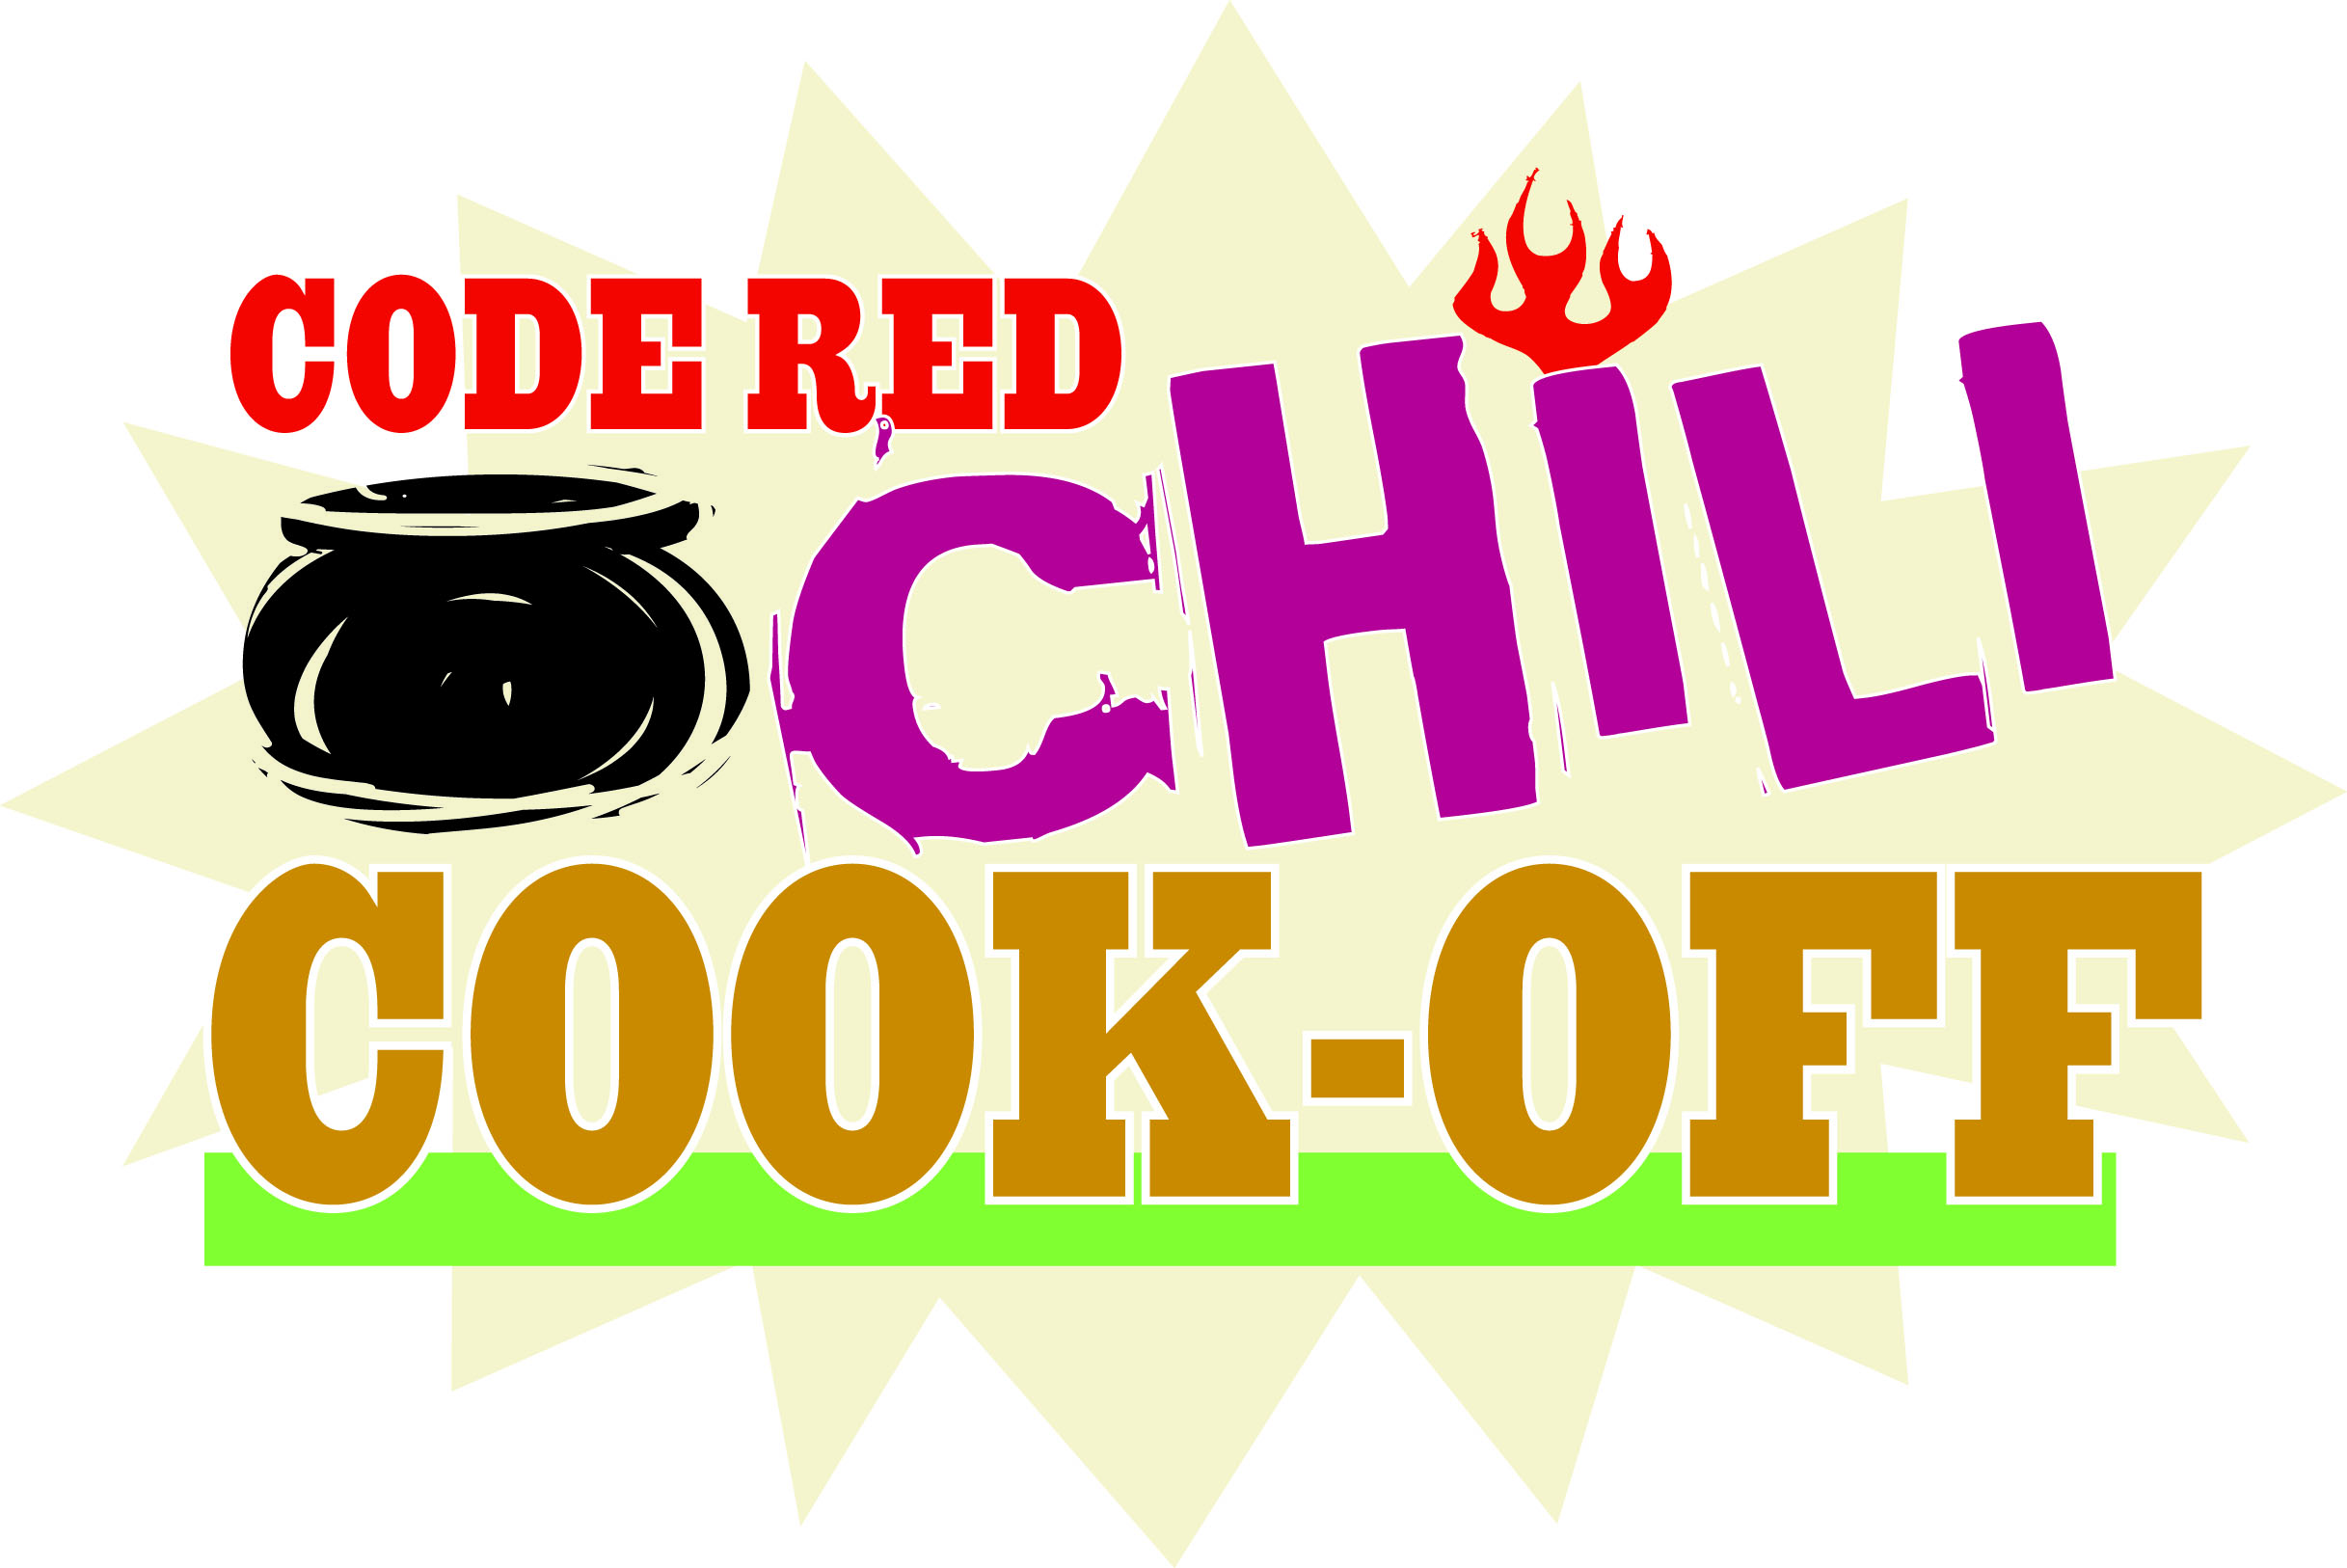 Join us for the 5th Annual Code Red Chili Cook-Off